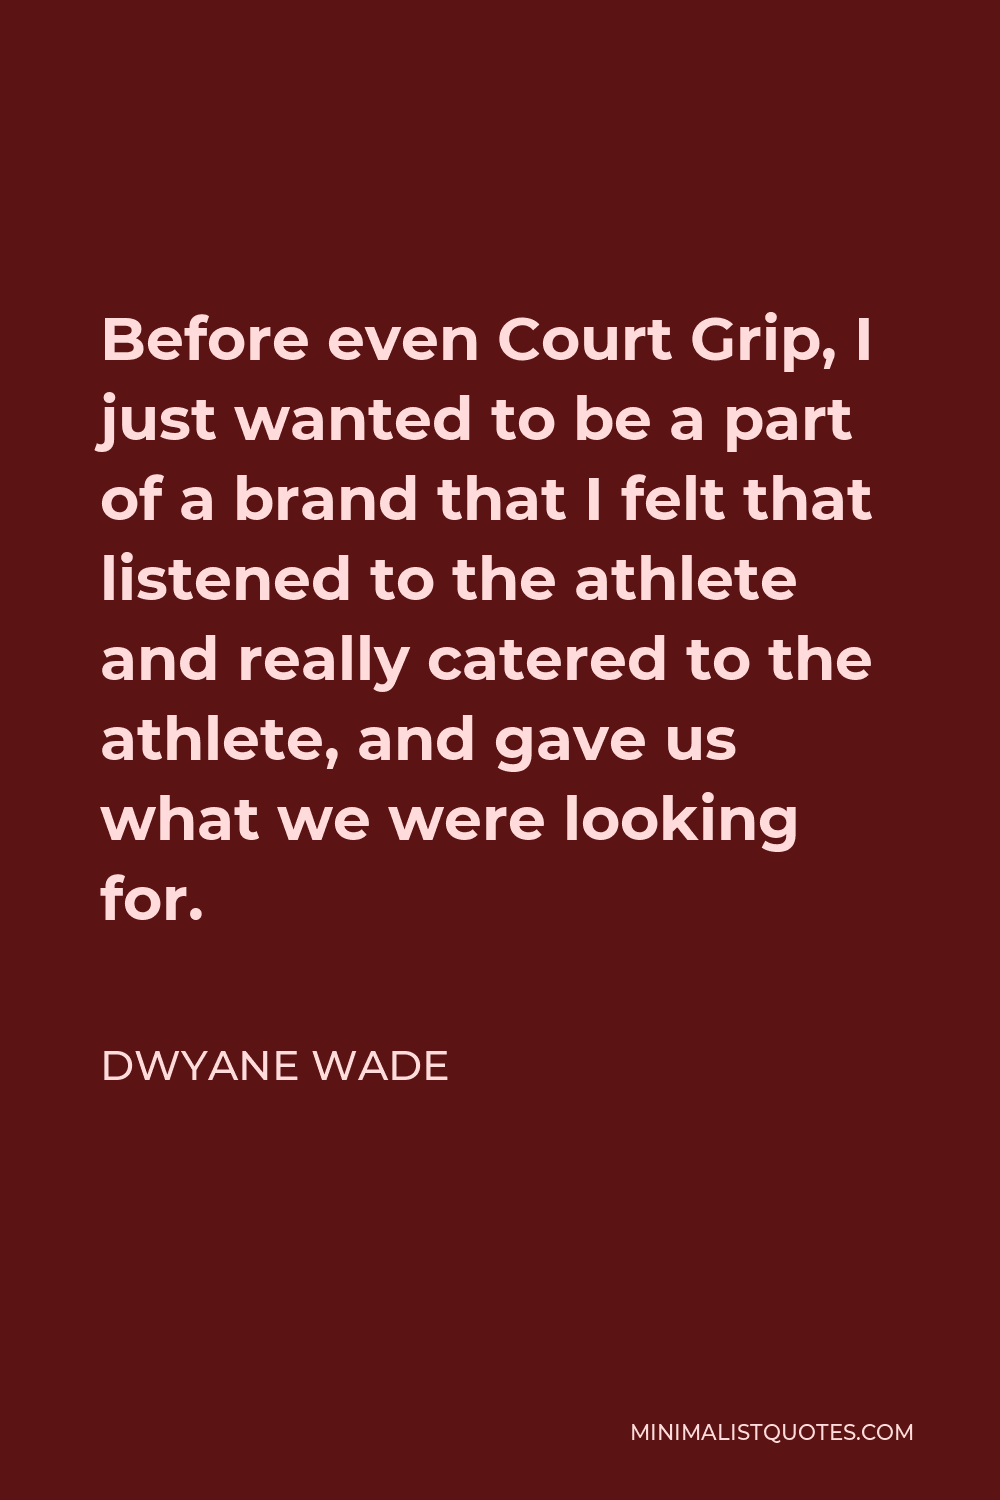 Dwyane Wade Quote - Before even Court Grip, I just wanted to be a part of a brand that I felt that listened to the athlete and really catered to the athlete, and gave us what we were looking for.